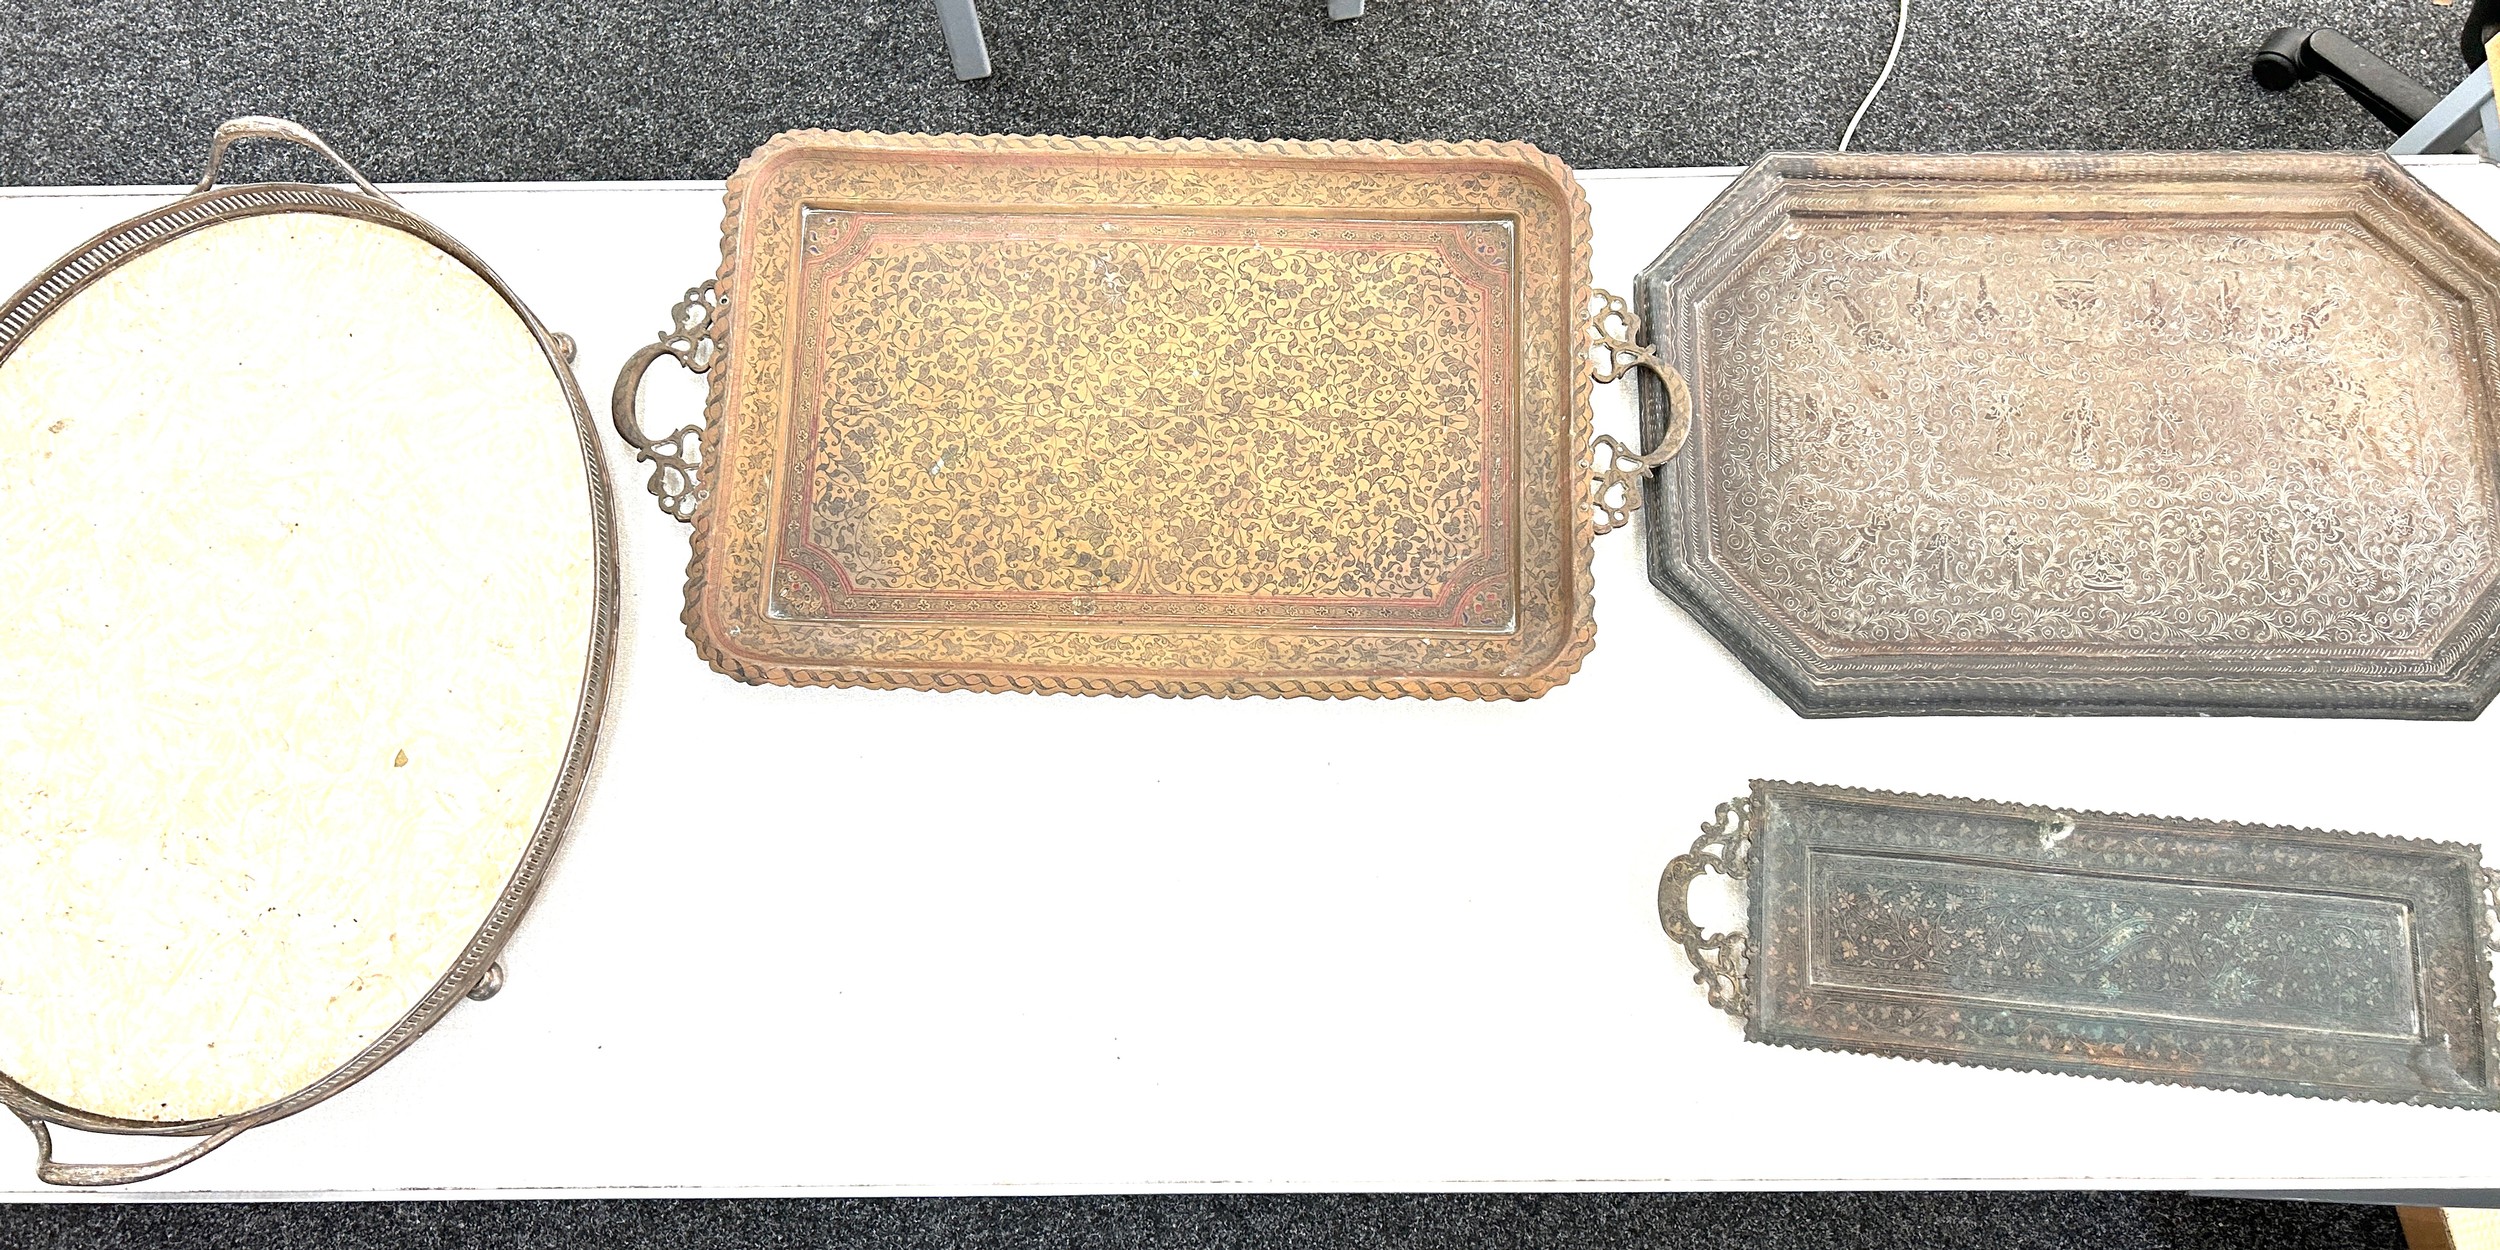 3 Antique Indian finely chased serving/ tea trays and a large vintage serving tray with silver